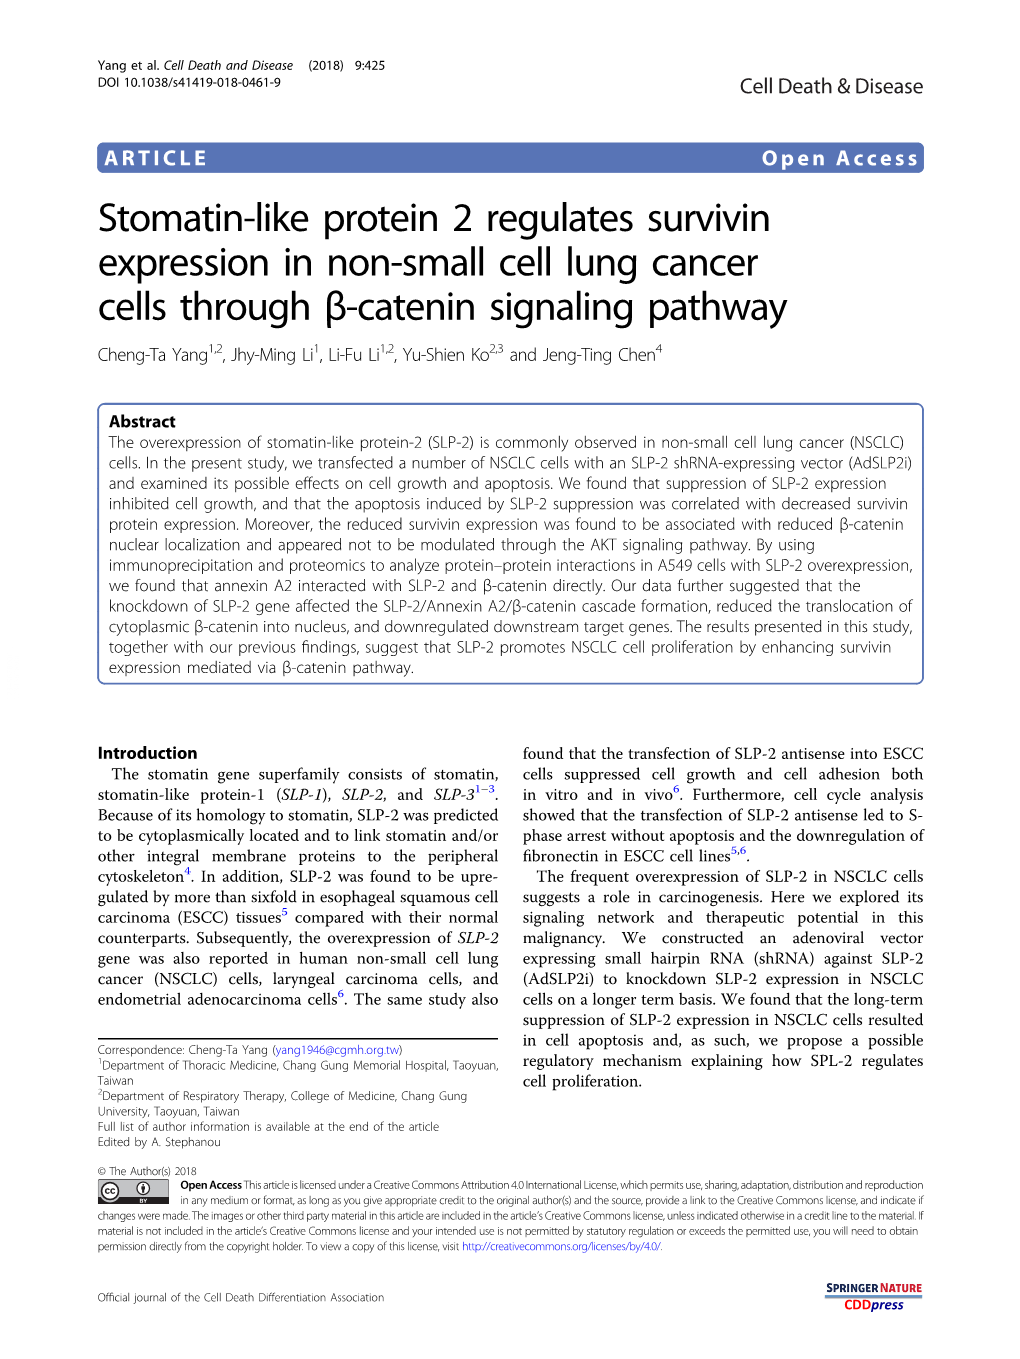 Stomatin-Like Protein 2 Regulates Survivin Expression in Non-Small